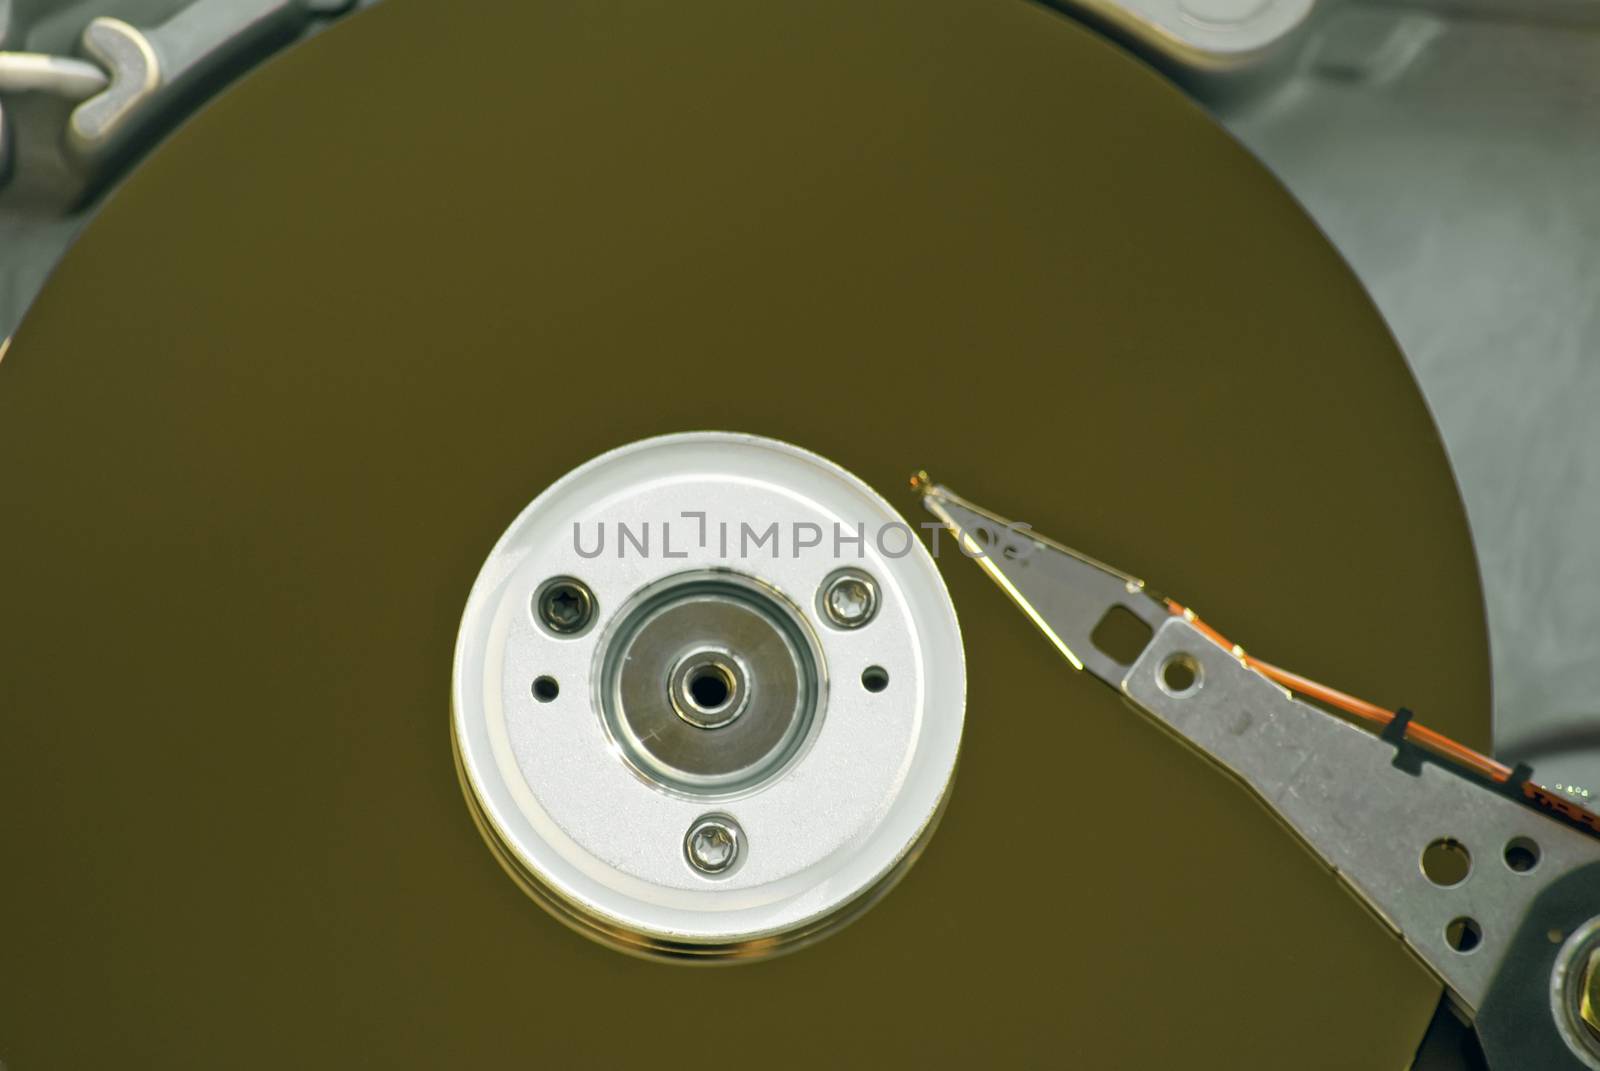 Macro View Of Computer Hard Drive Internals by rcarner